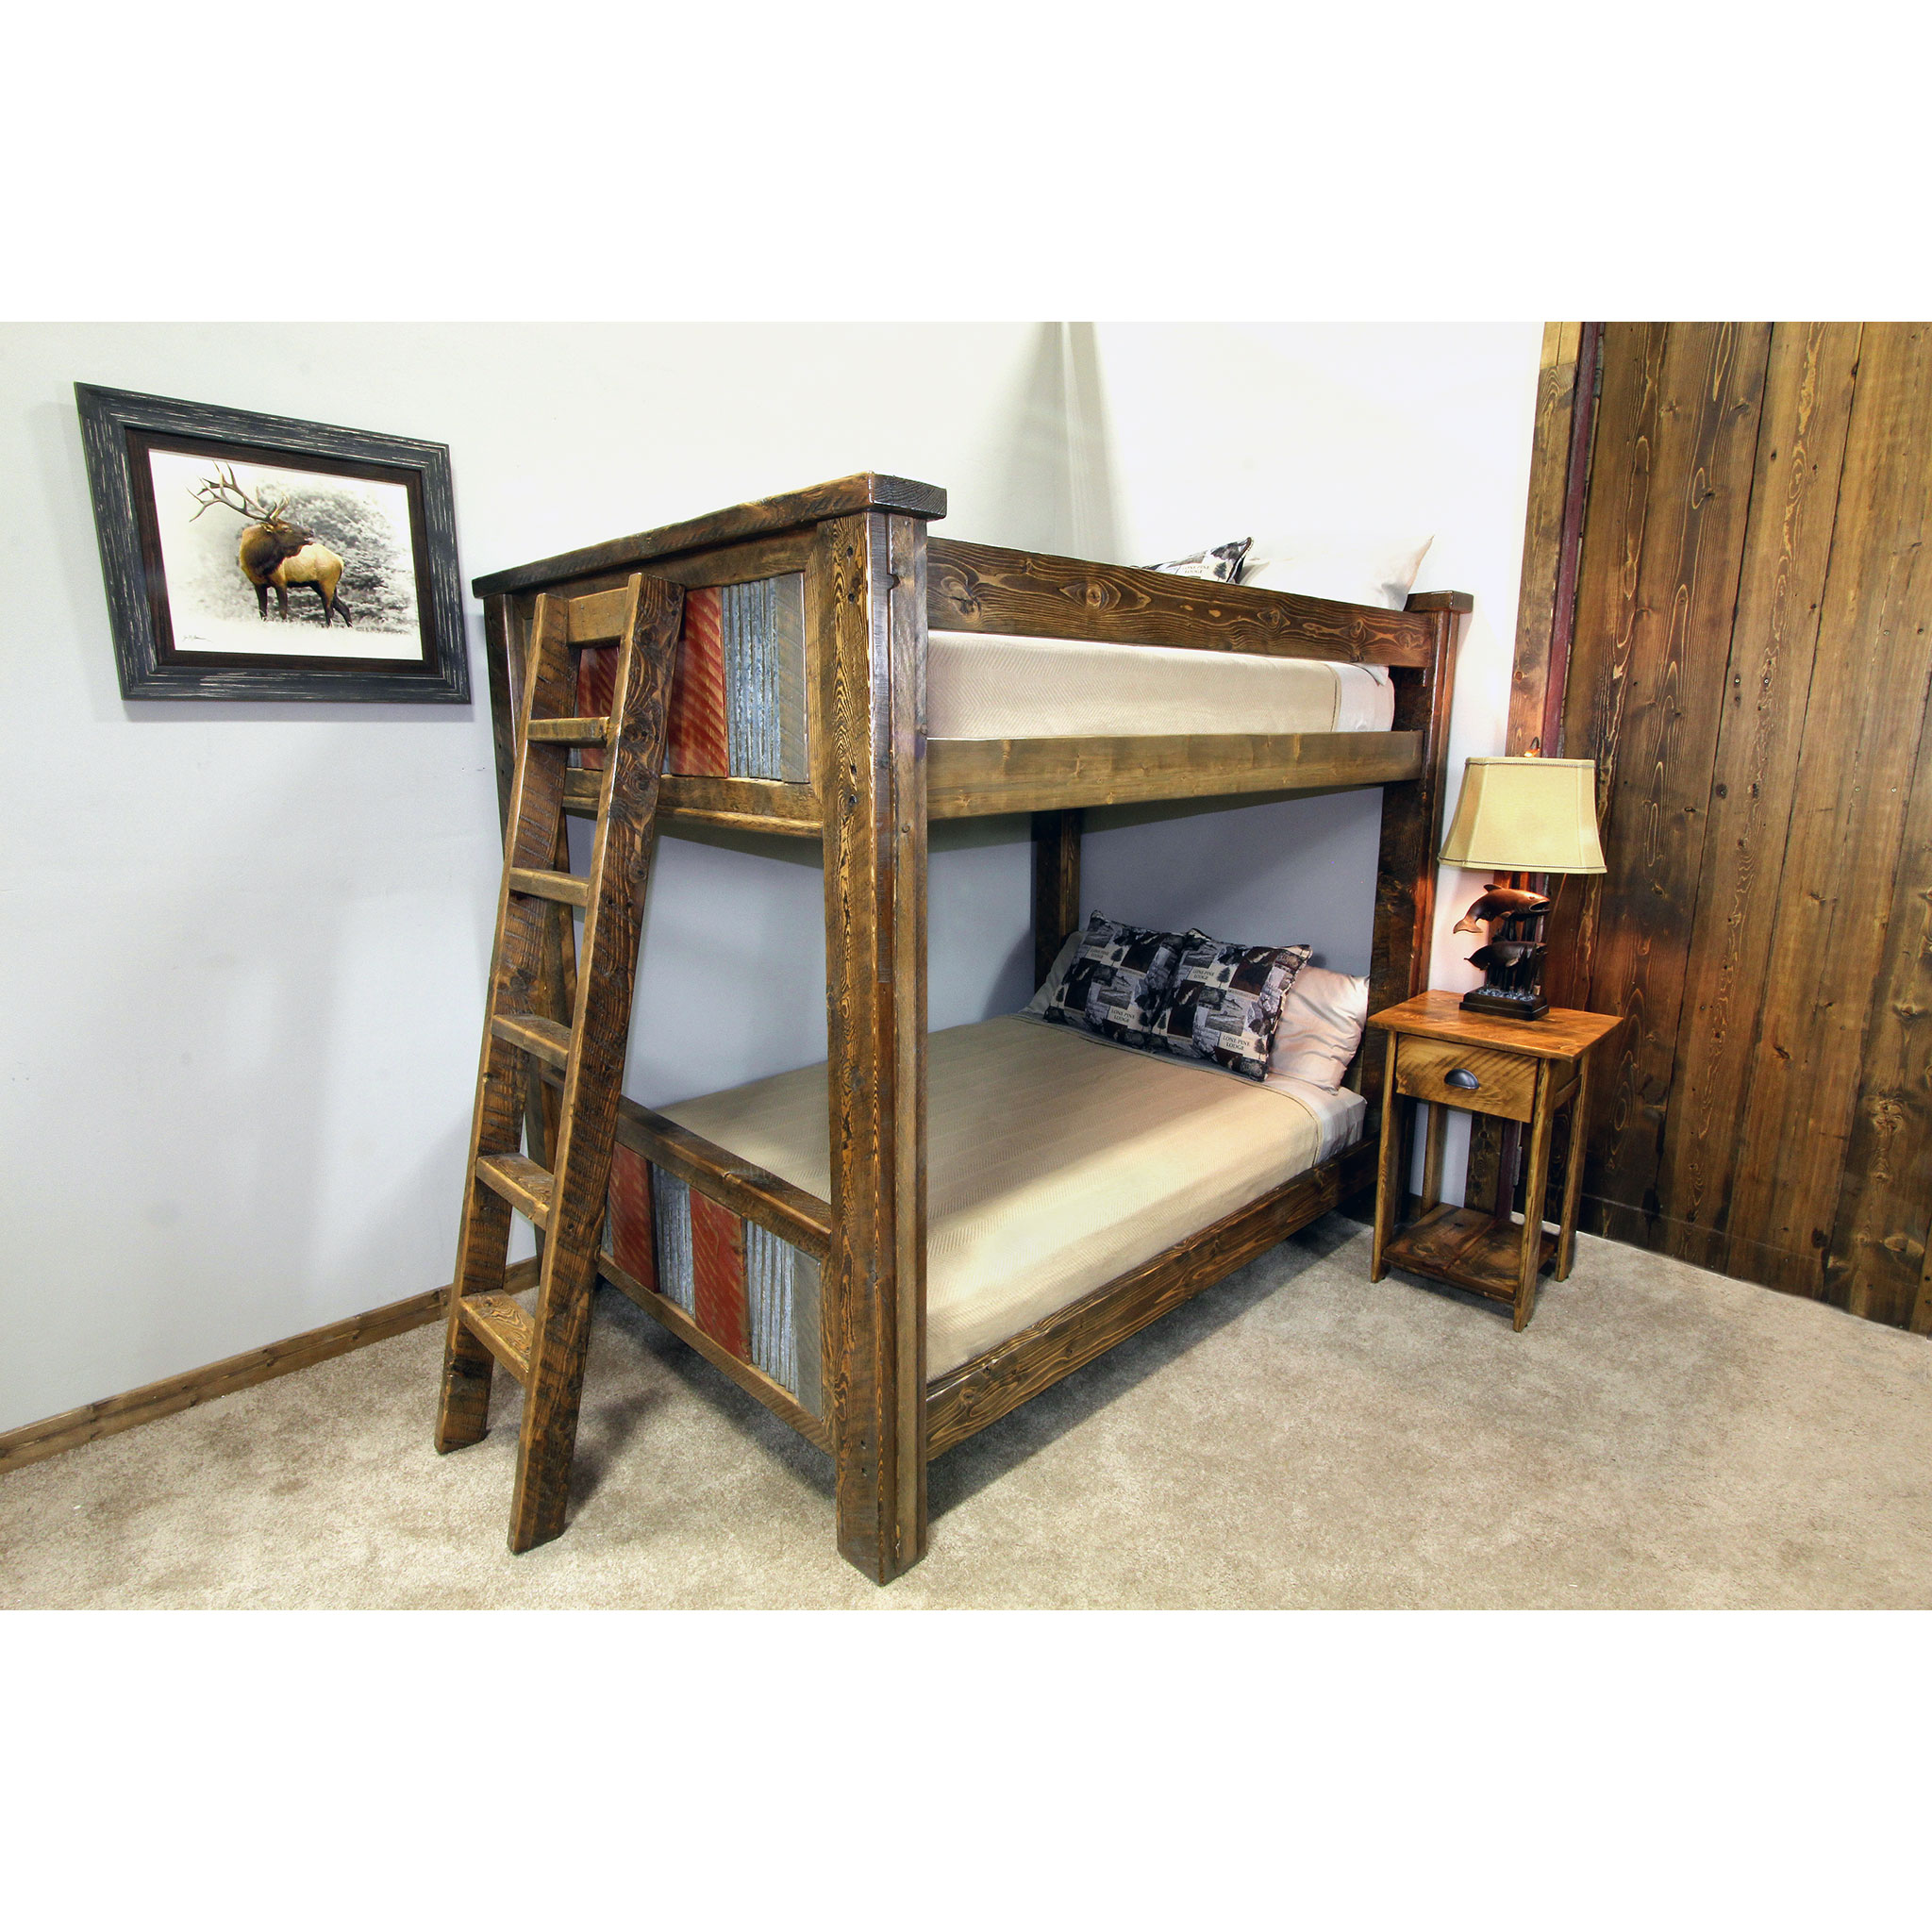 Rustic Metal And Wood Bunk Bed Four, Wood And Metal Bunk Beds